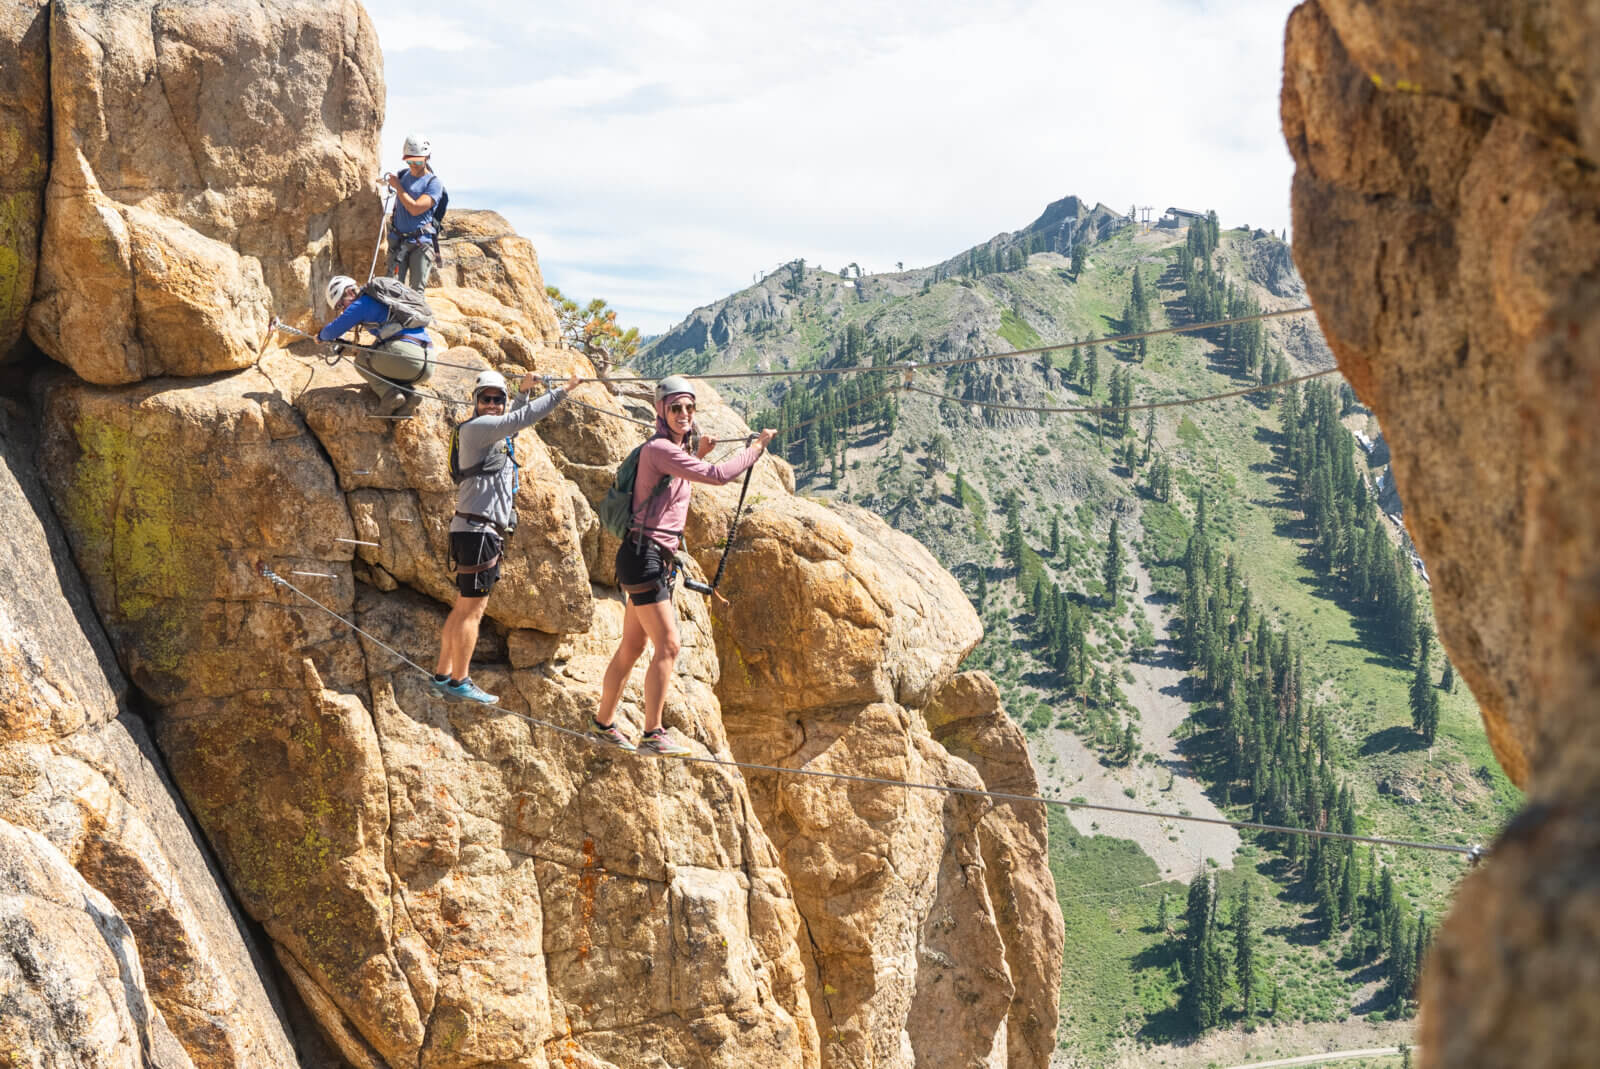 A group of climbers on a monkey bridge on the Tahoe Via Ferrata at Palisades Tahoe in Olympic Valley. One of the best Lake Tahoe adventures!